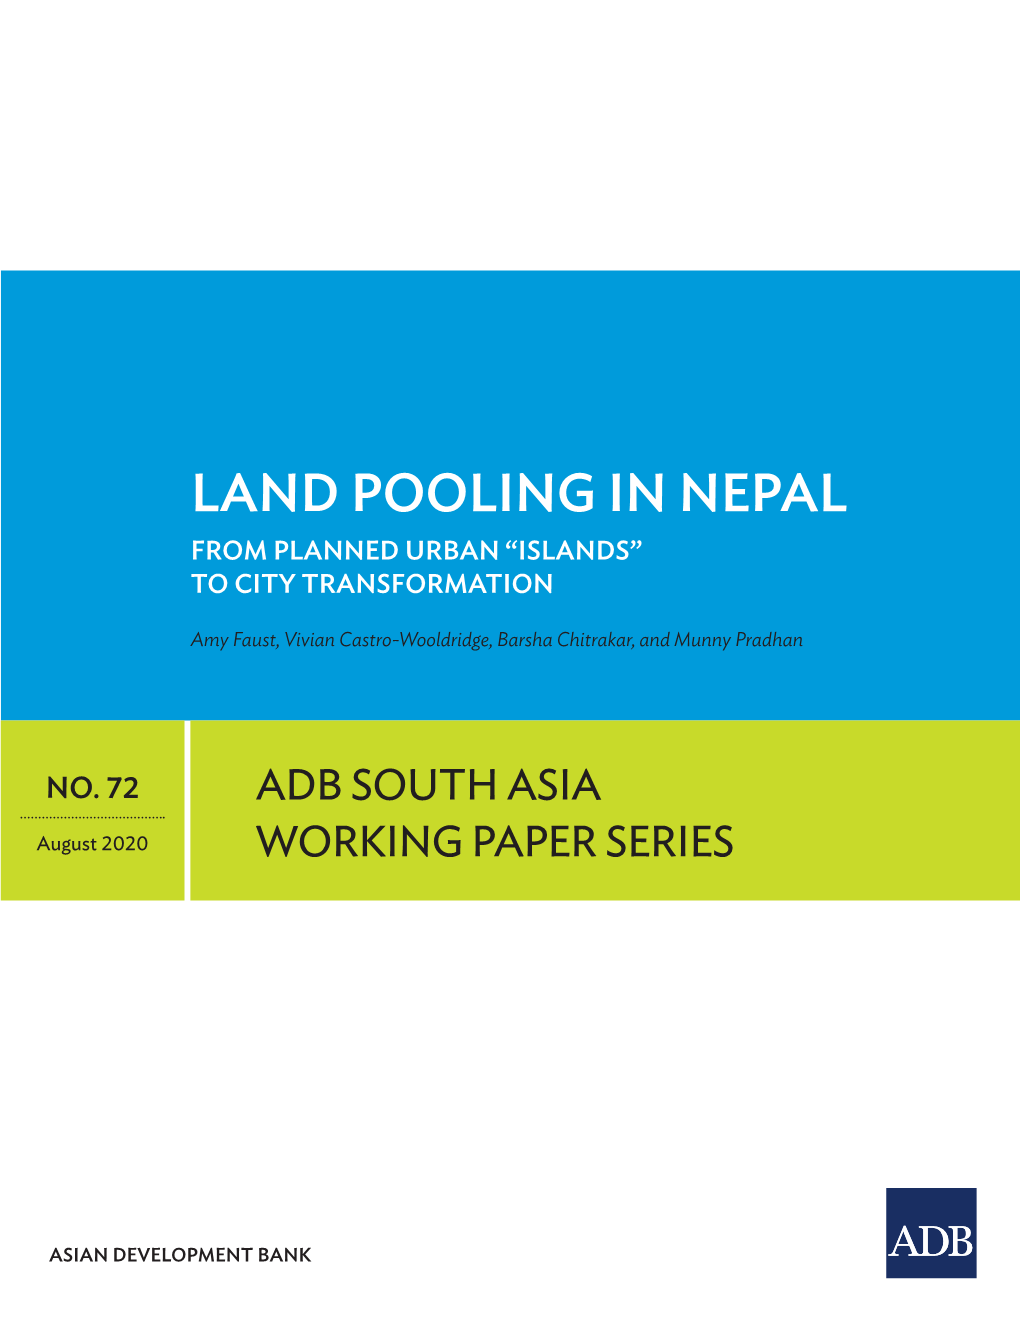 Land Pooling in Nepal from Planned Urban “Islands” to City Transformation